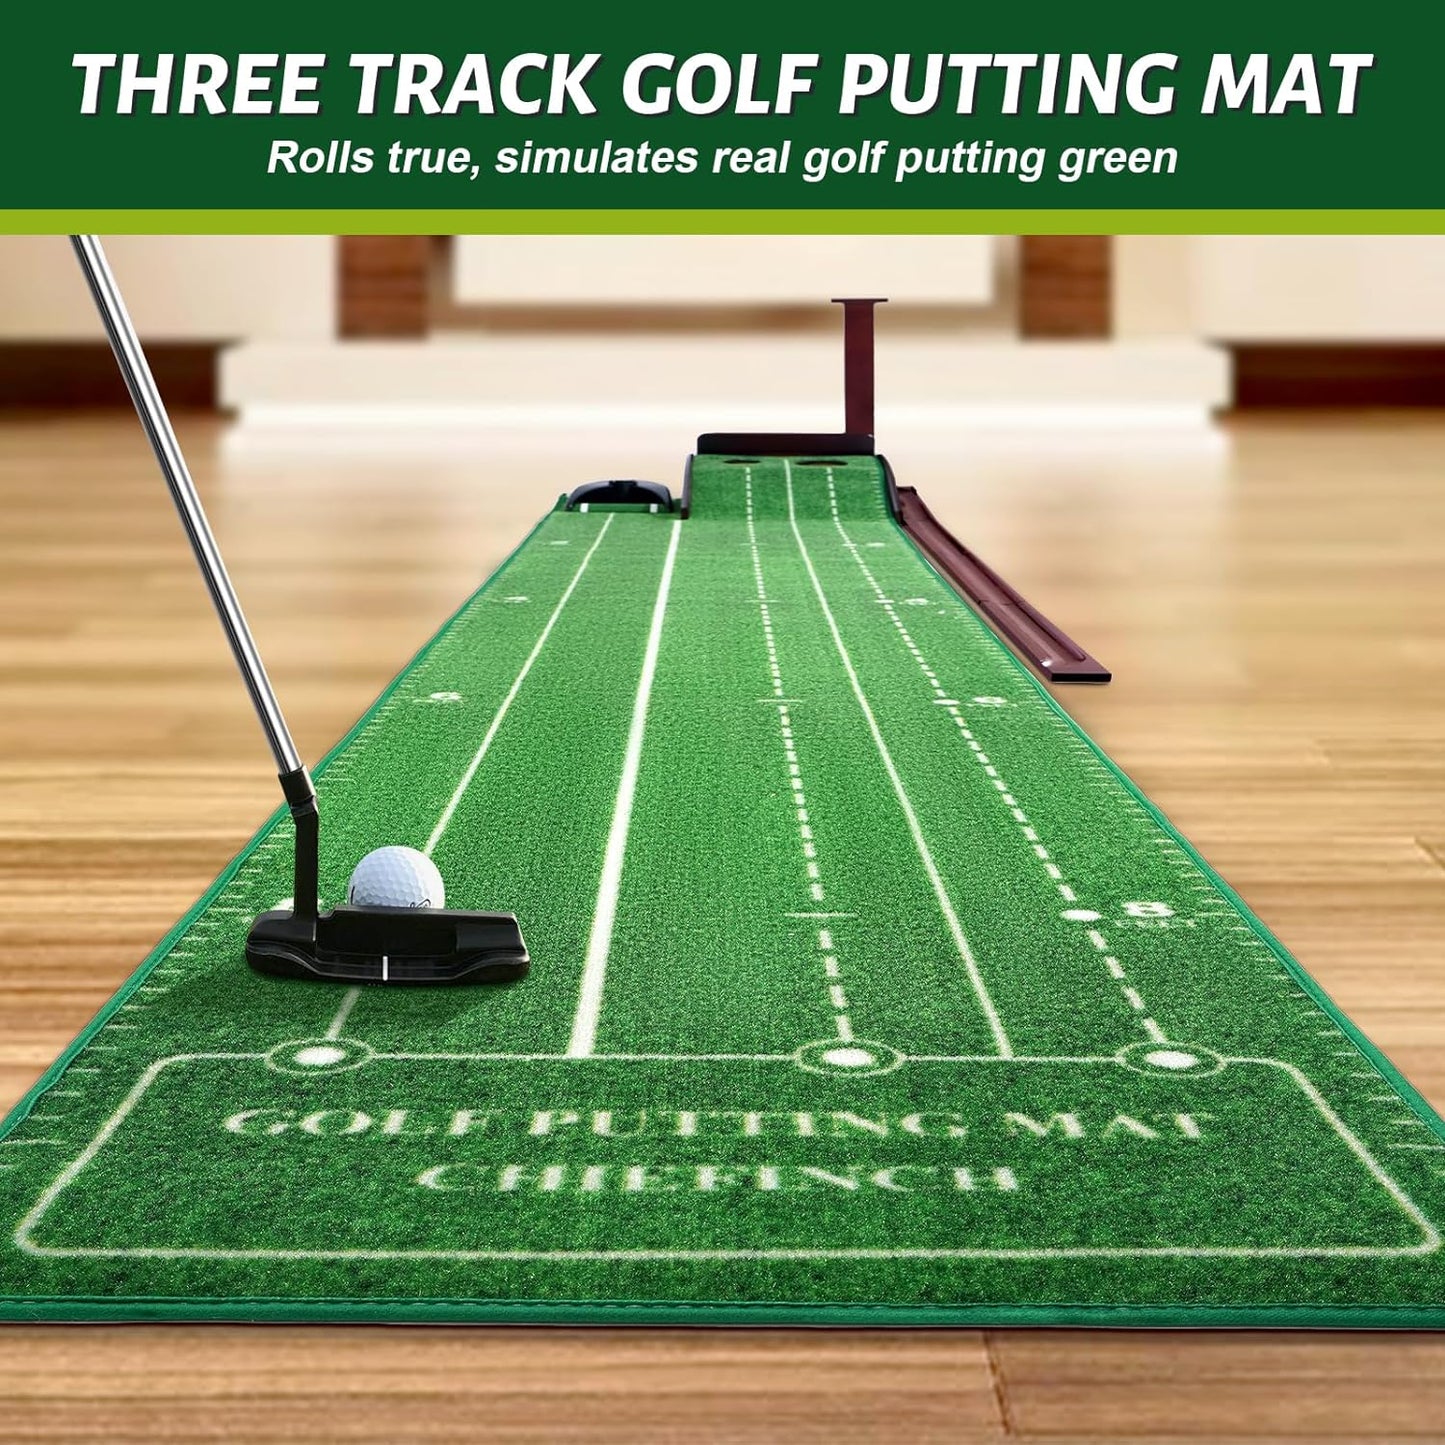 Golf Putting Mat for Indoors - Putting Green with 3 Tracks & Automatic Ball Return, Golf Training Equipment for Mini Game & Golf Pratice at Home or in Office, Gift for Golfer/Golf Lovers/Man